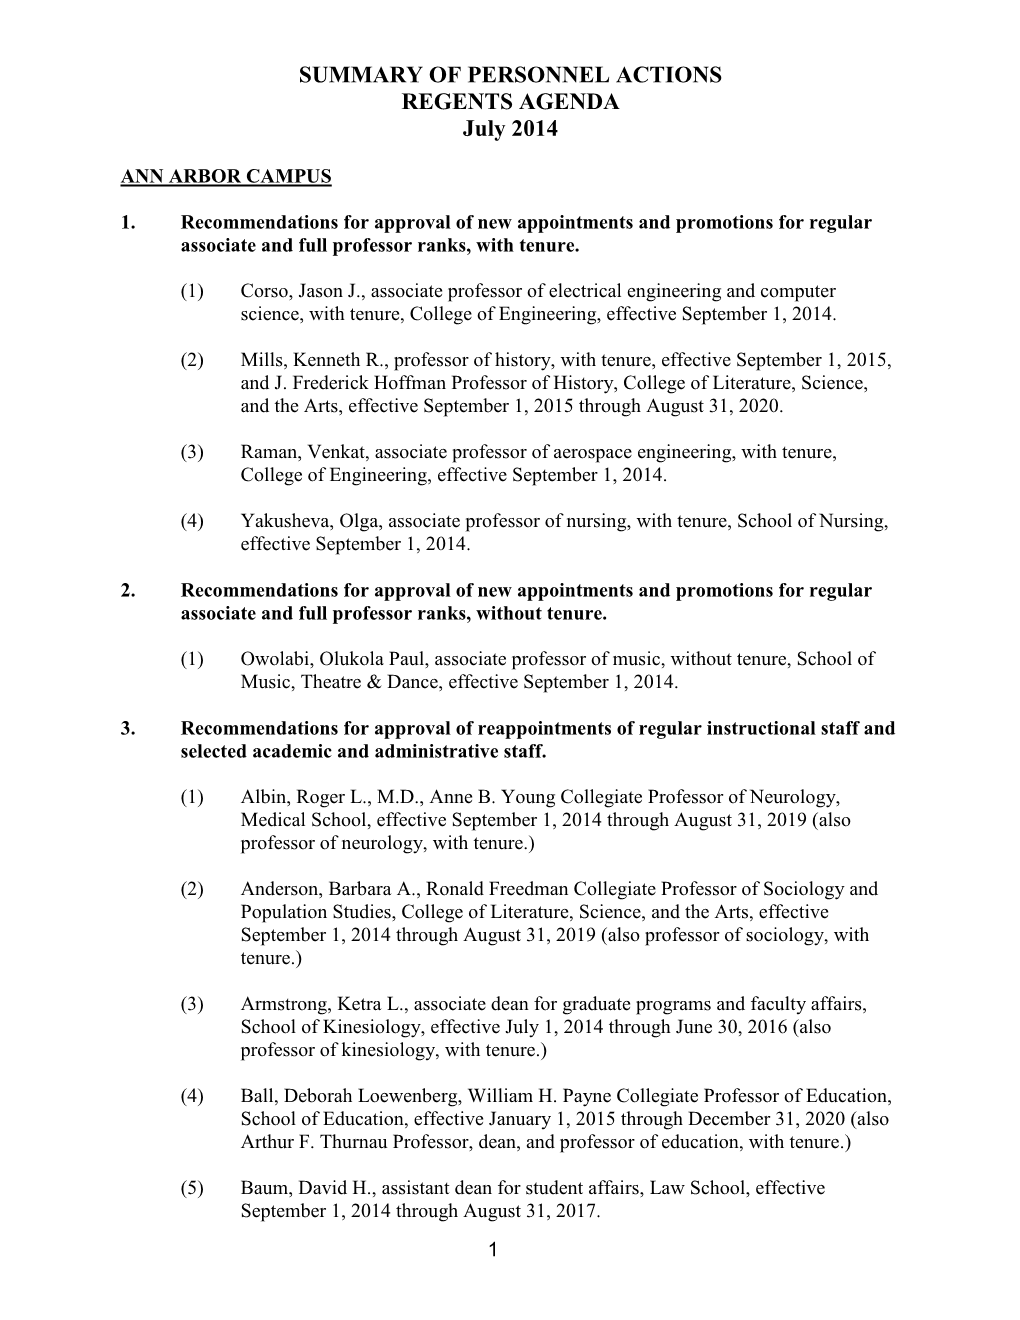 SUMMARY of PERSONNEL ACTIONS REGENTS AGENDA July 2014